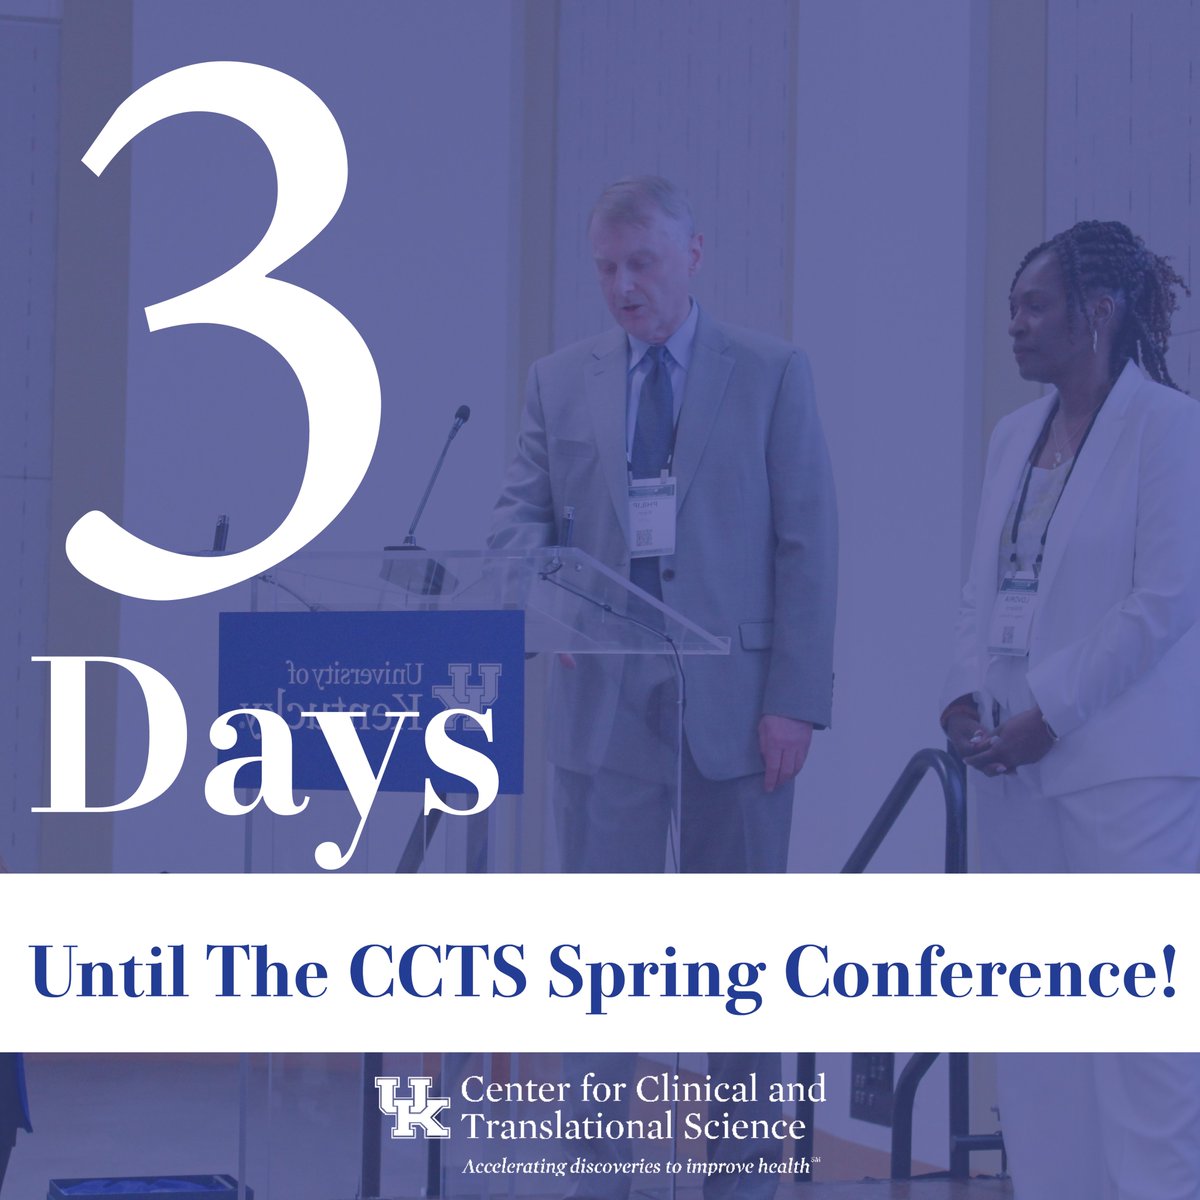 Only 3 DAYS LEFT for the 2024 CCTS Spring Conference! Hundreds of investigators, research staff, trainees, students, and community partners, attend. It's an opportunity for us to share findings, build collaborations, and provide mentorship. Learn more: ccts.uky.edu/conference2024